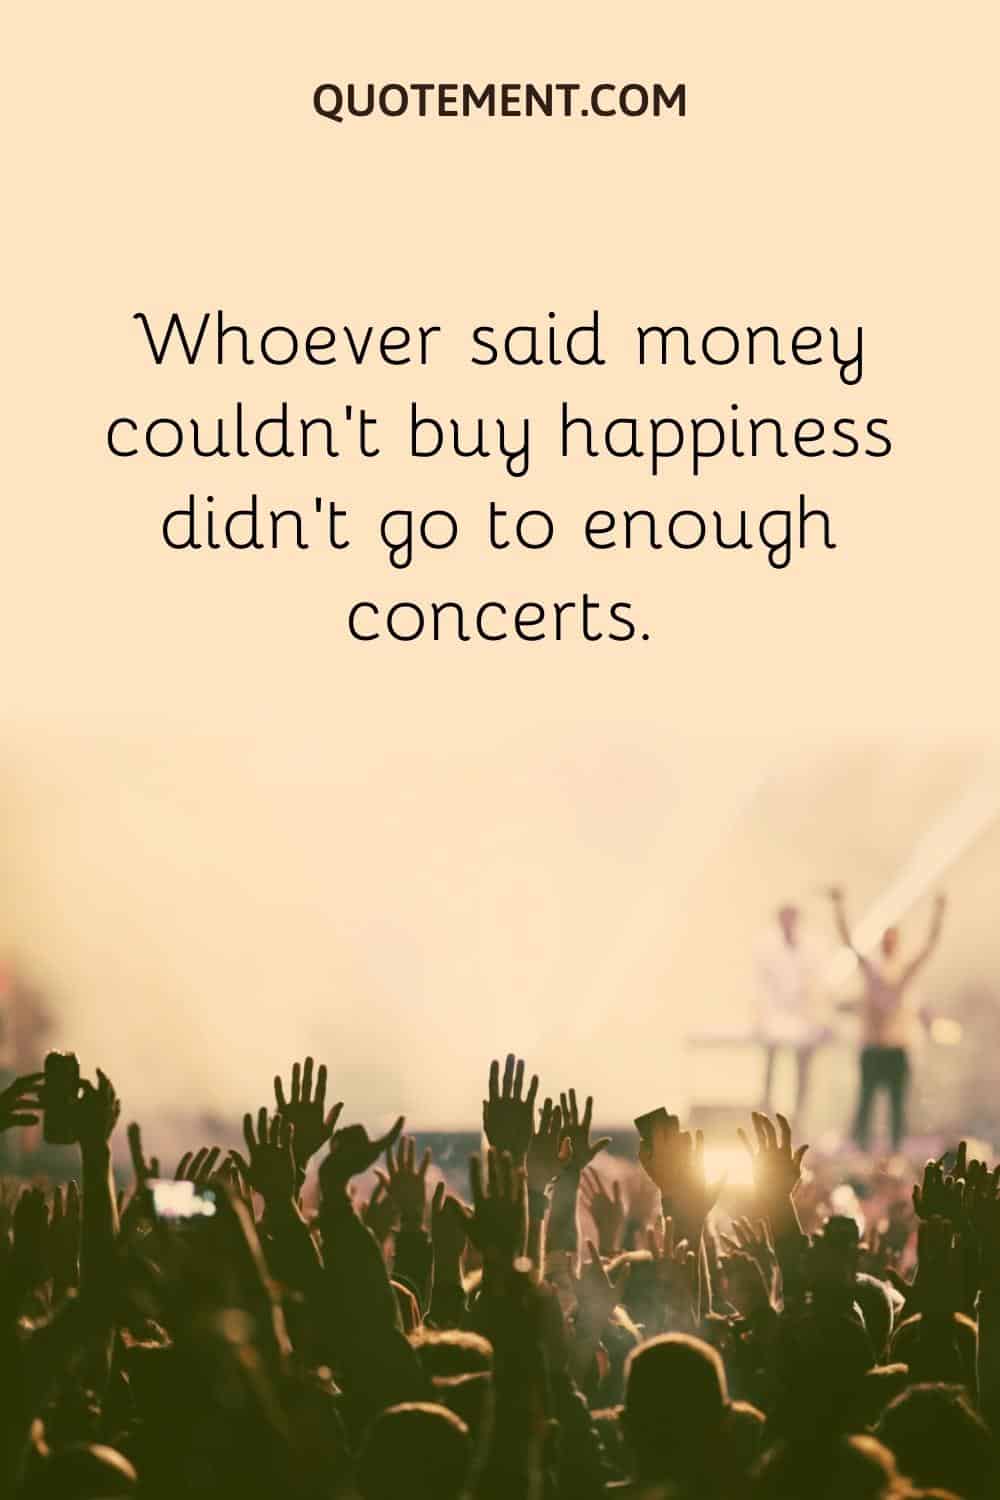 Whoever said money couldn’t buy happiness didn’t go to enough concerts.